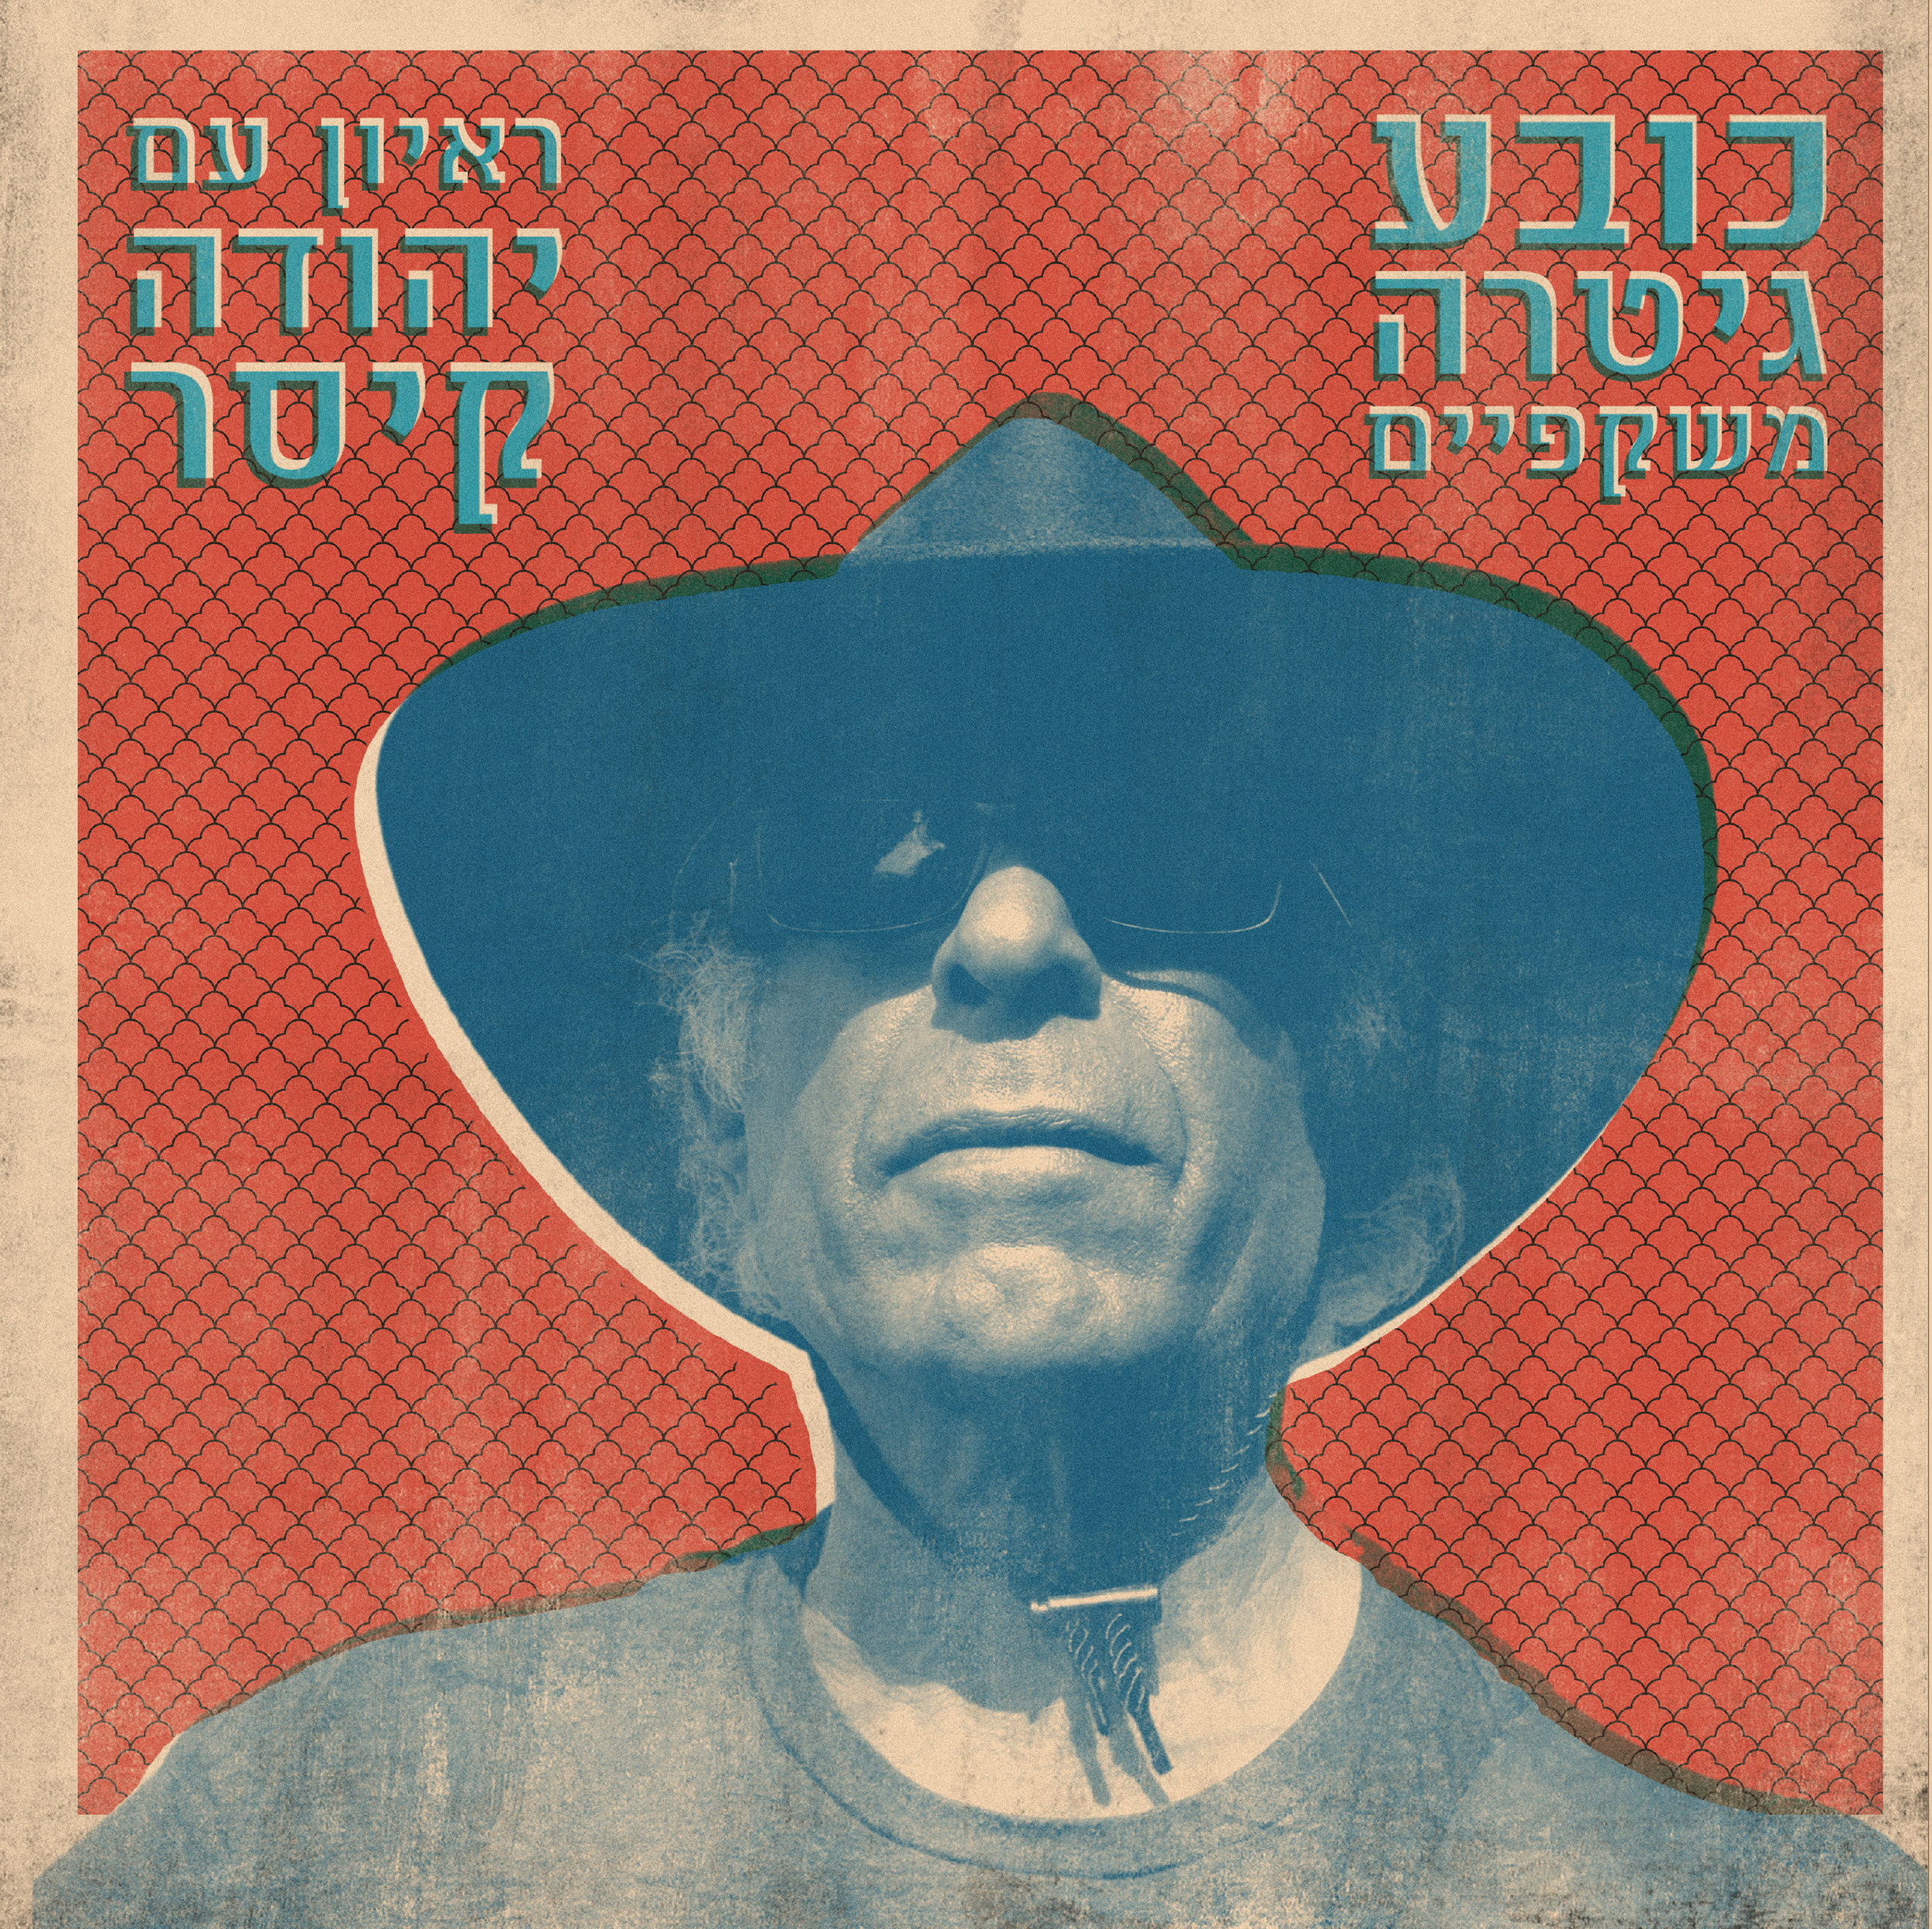  Interview with Yehuda Keisar, A groundbreaking musician in oriental and pop music in israel, with&nbsp;history of almost 50 years in the music business.   The interview is divided into six flyers&nbsp;plus an old vinyl cover that hold all the flyers